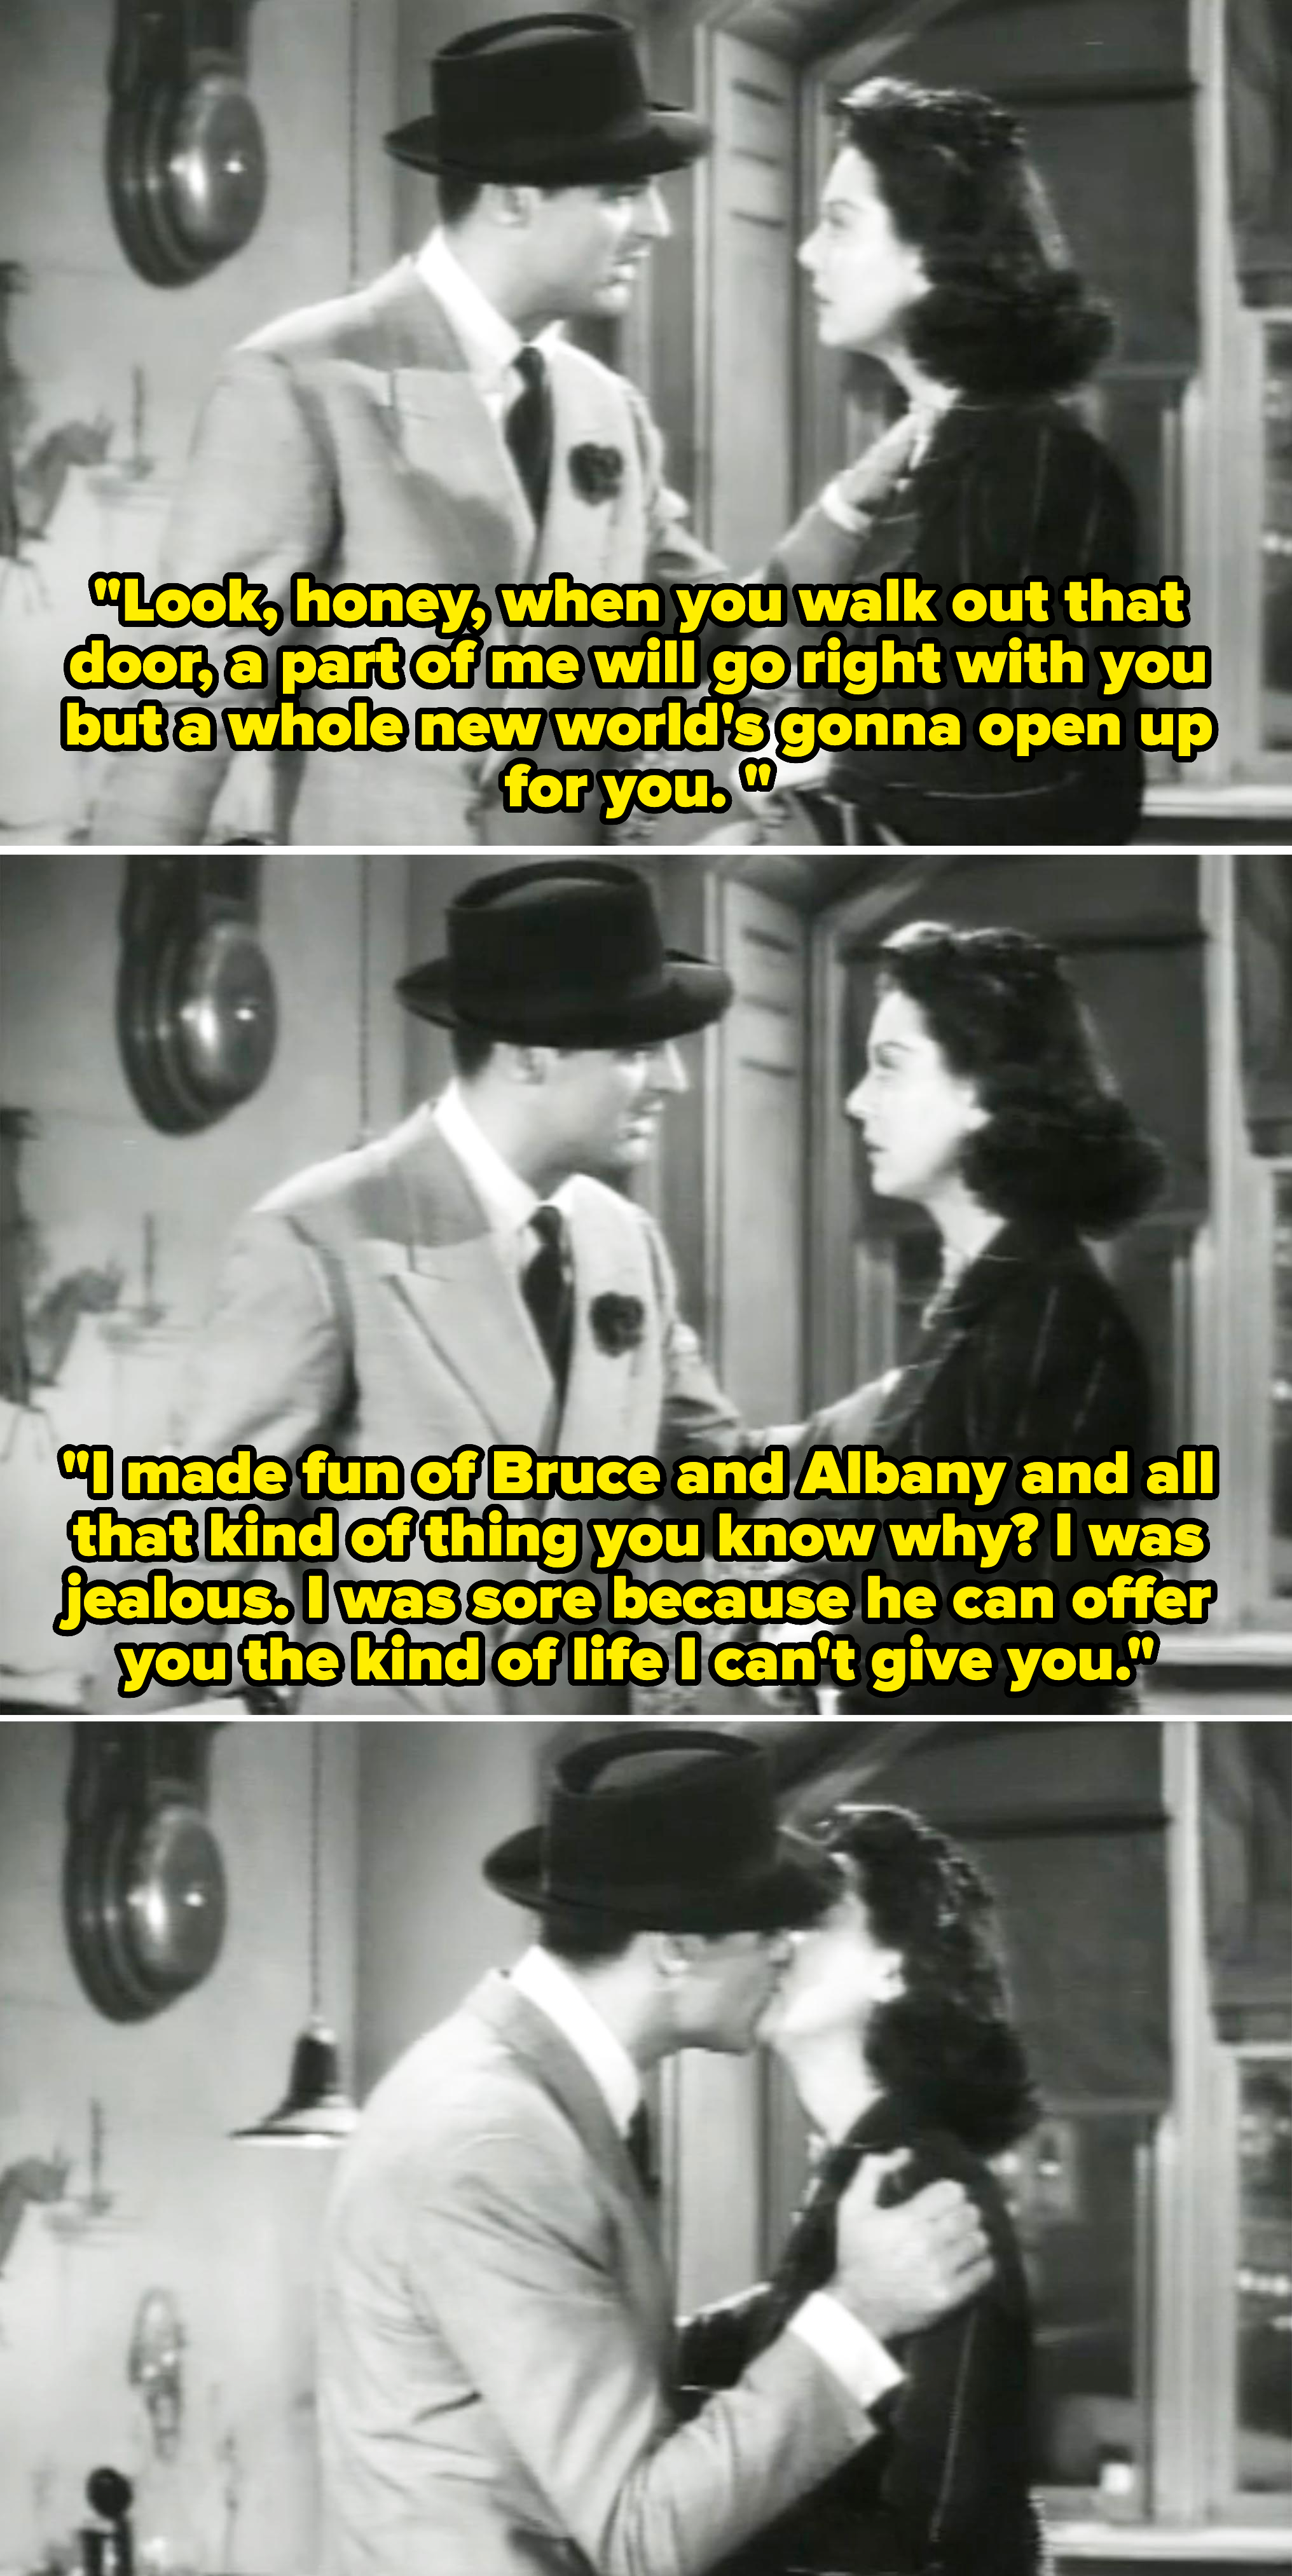 Three black-and-white film stills show Cary Grant in a suit and hat, and Rosalind Russell in a striped dress. They share an emotional moment followed by a kiss